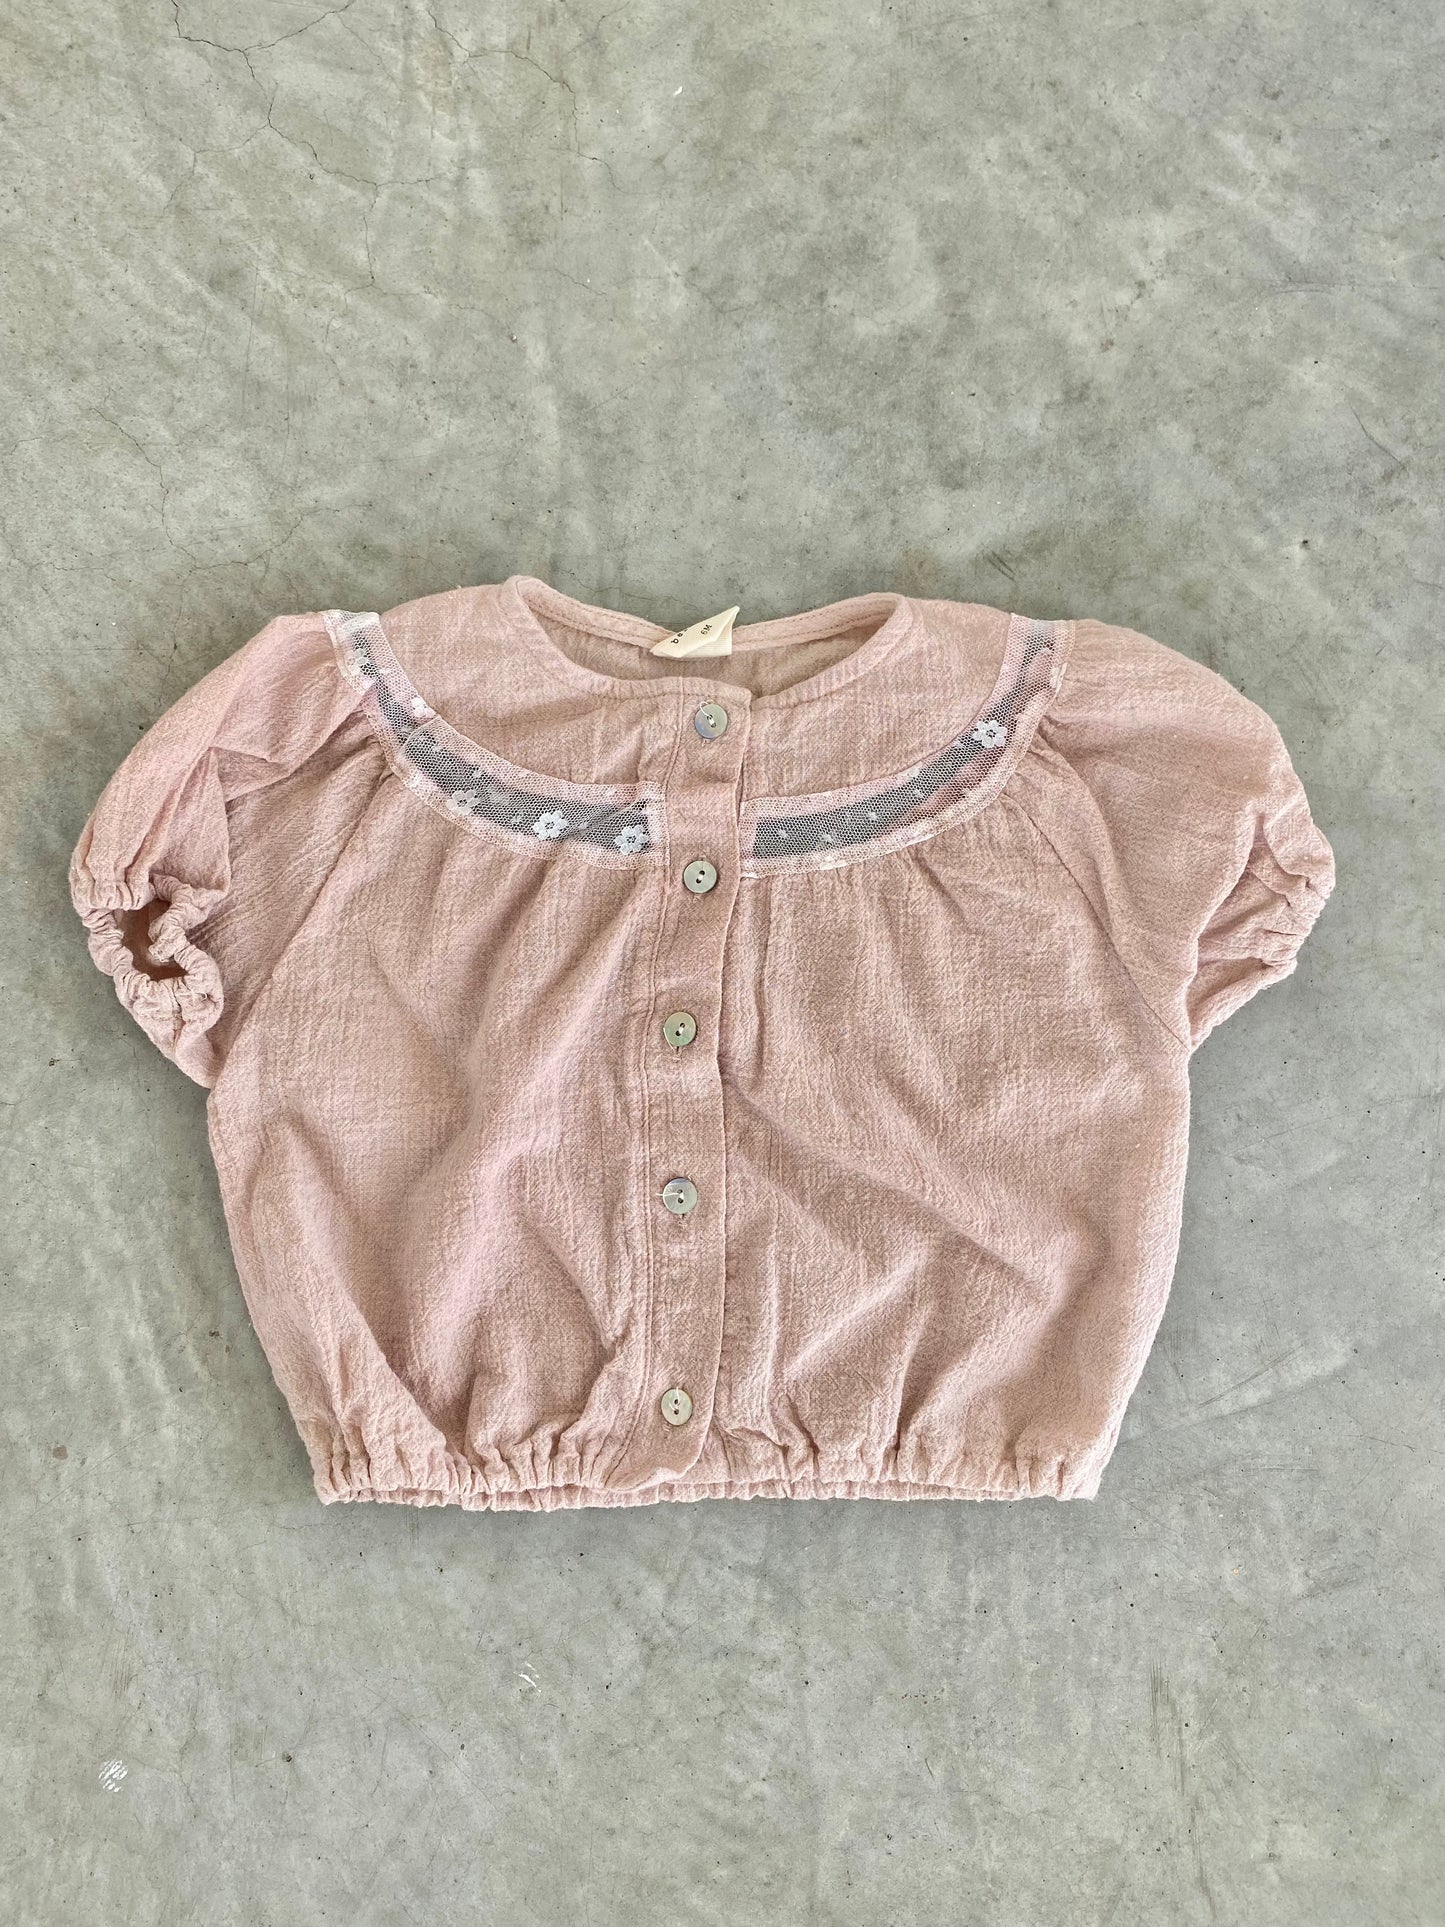 BELLA BABY BLOUSE - DUSTY PINK